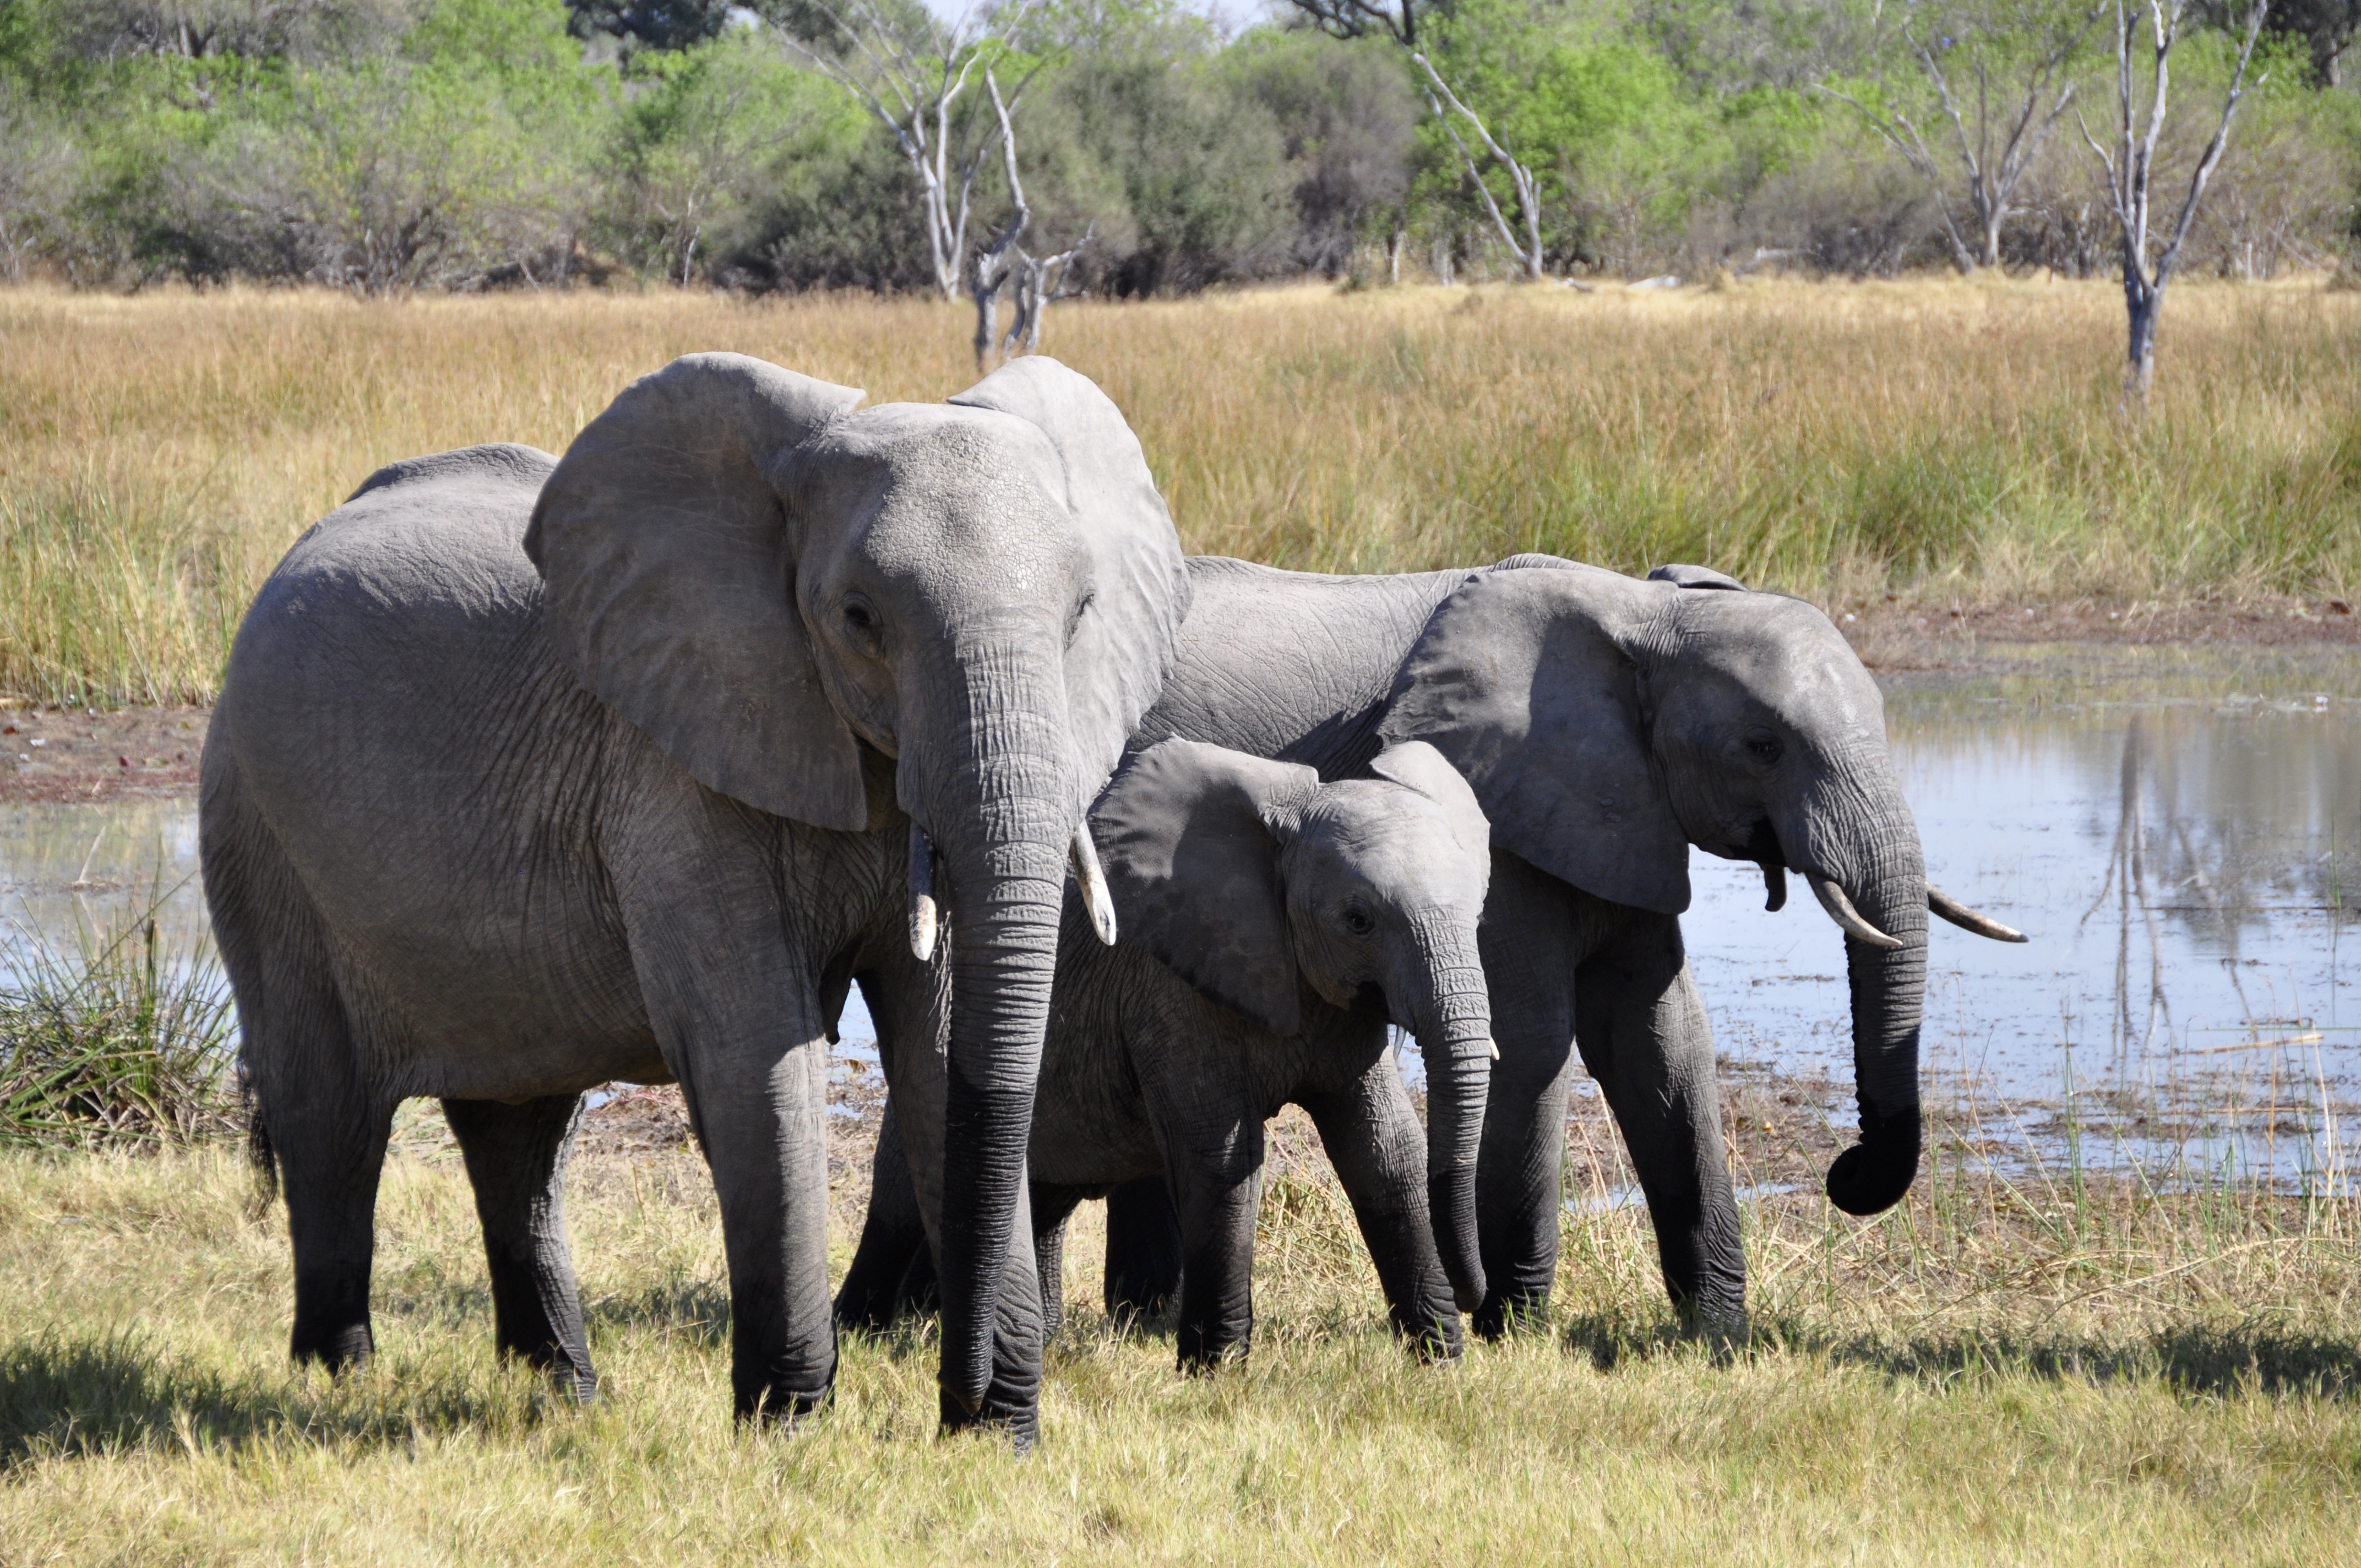 three gray elephants at green grass during daytime